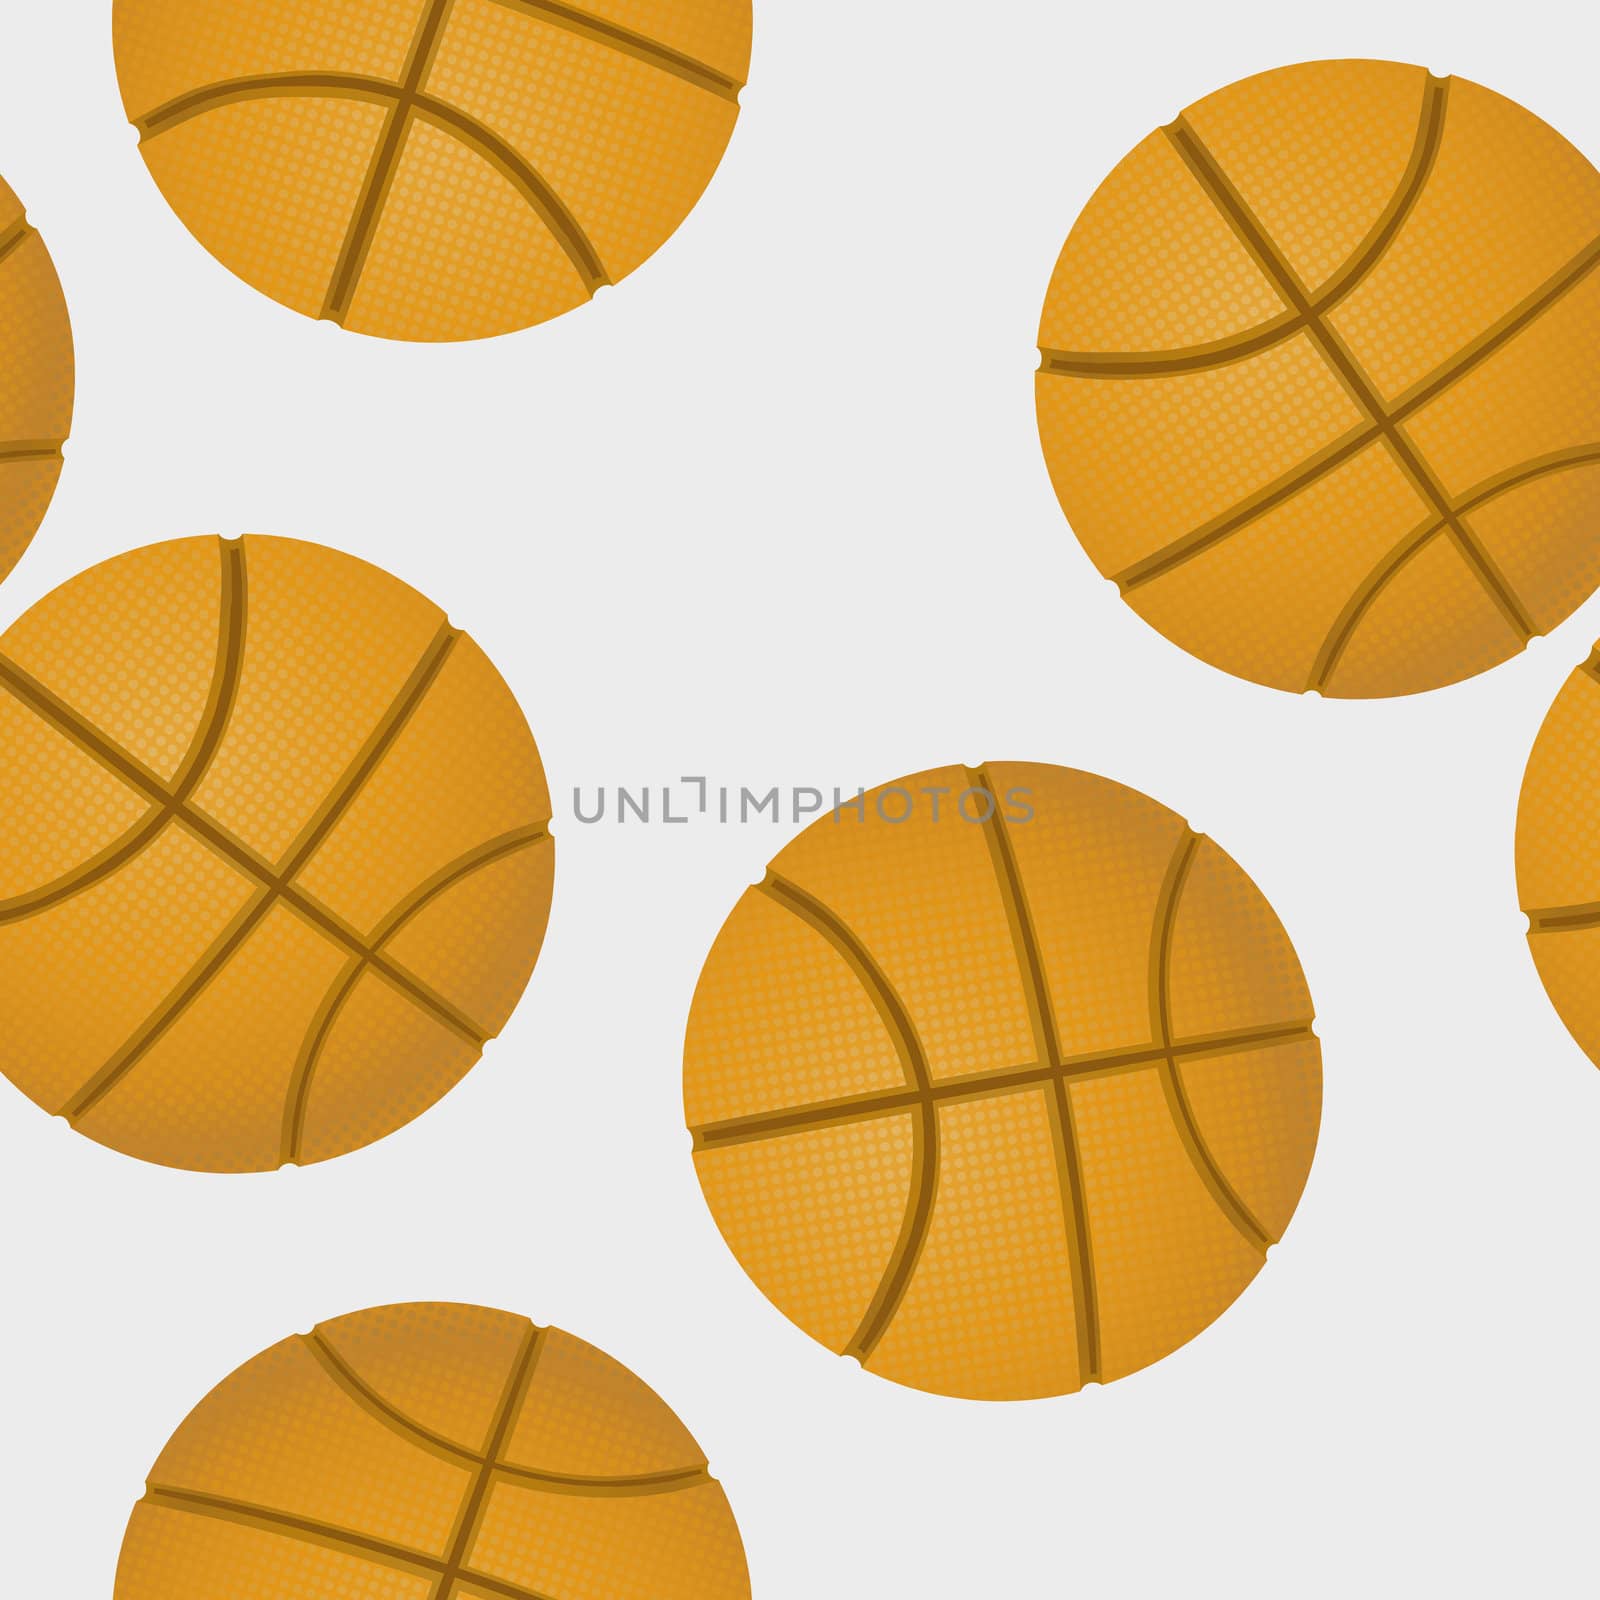 Pattern design with basketballs, abstract art